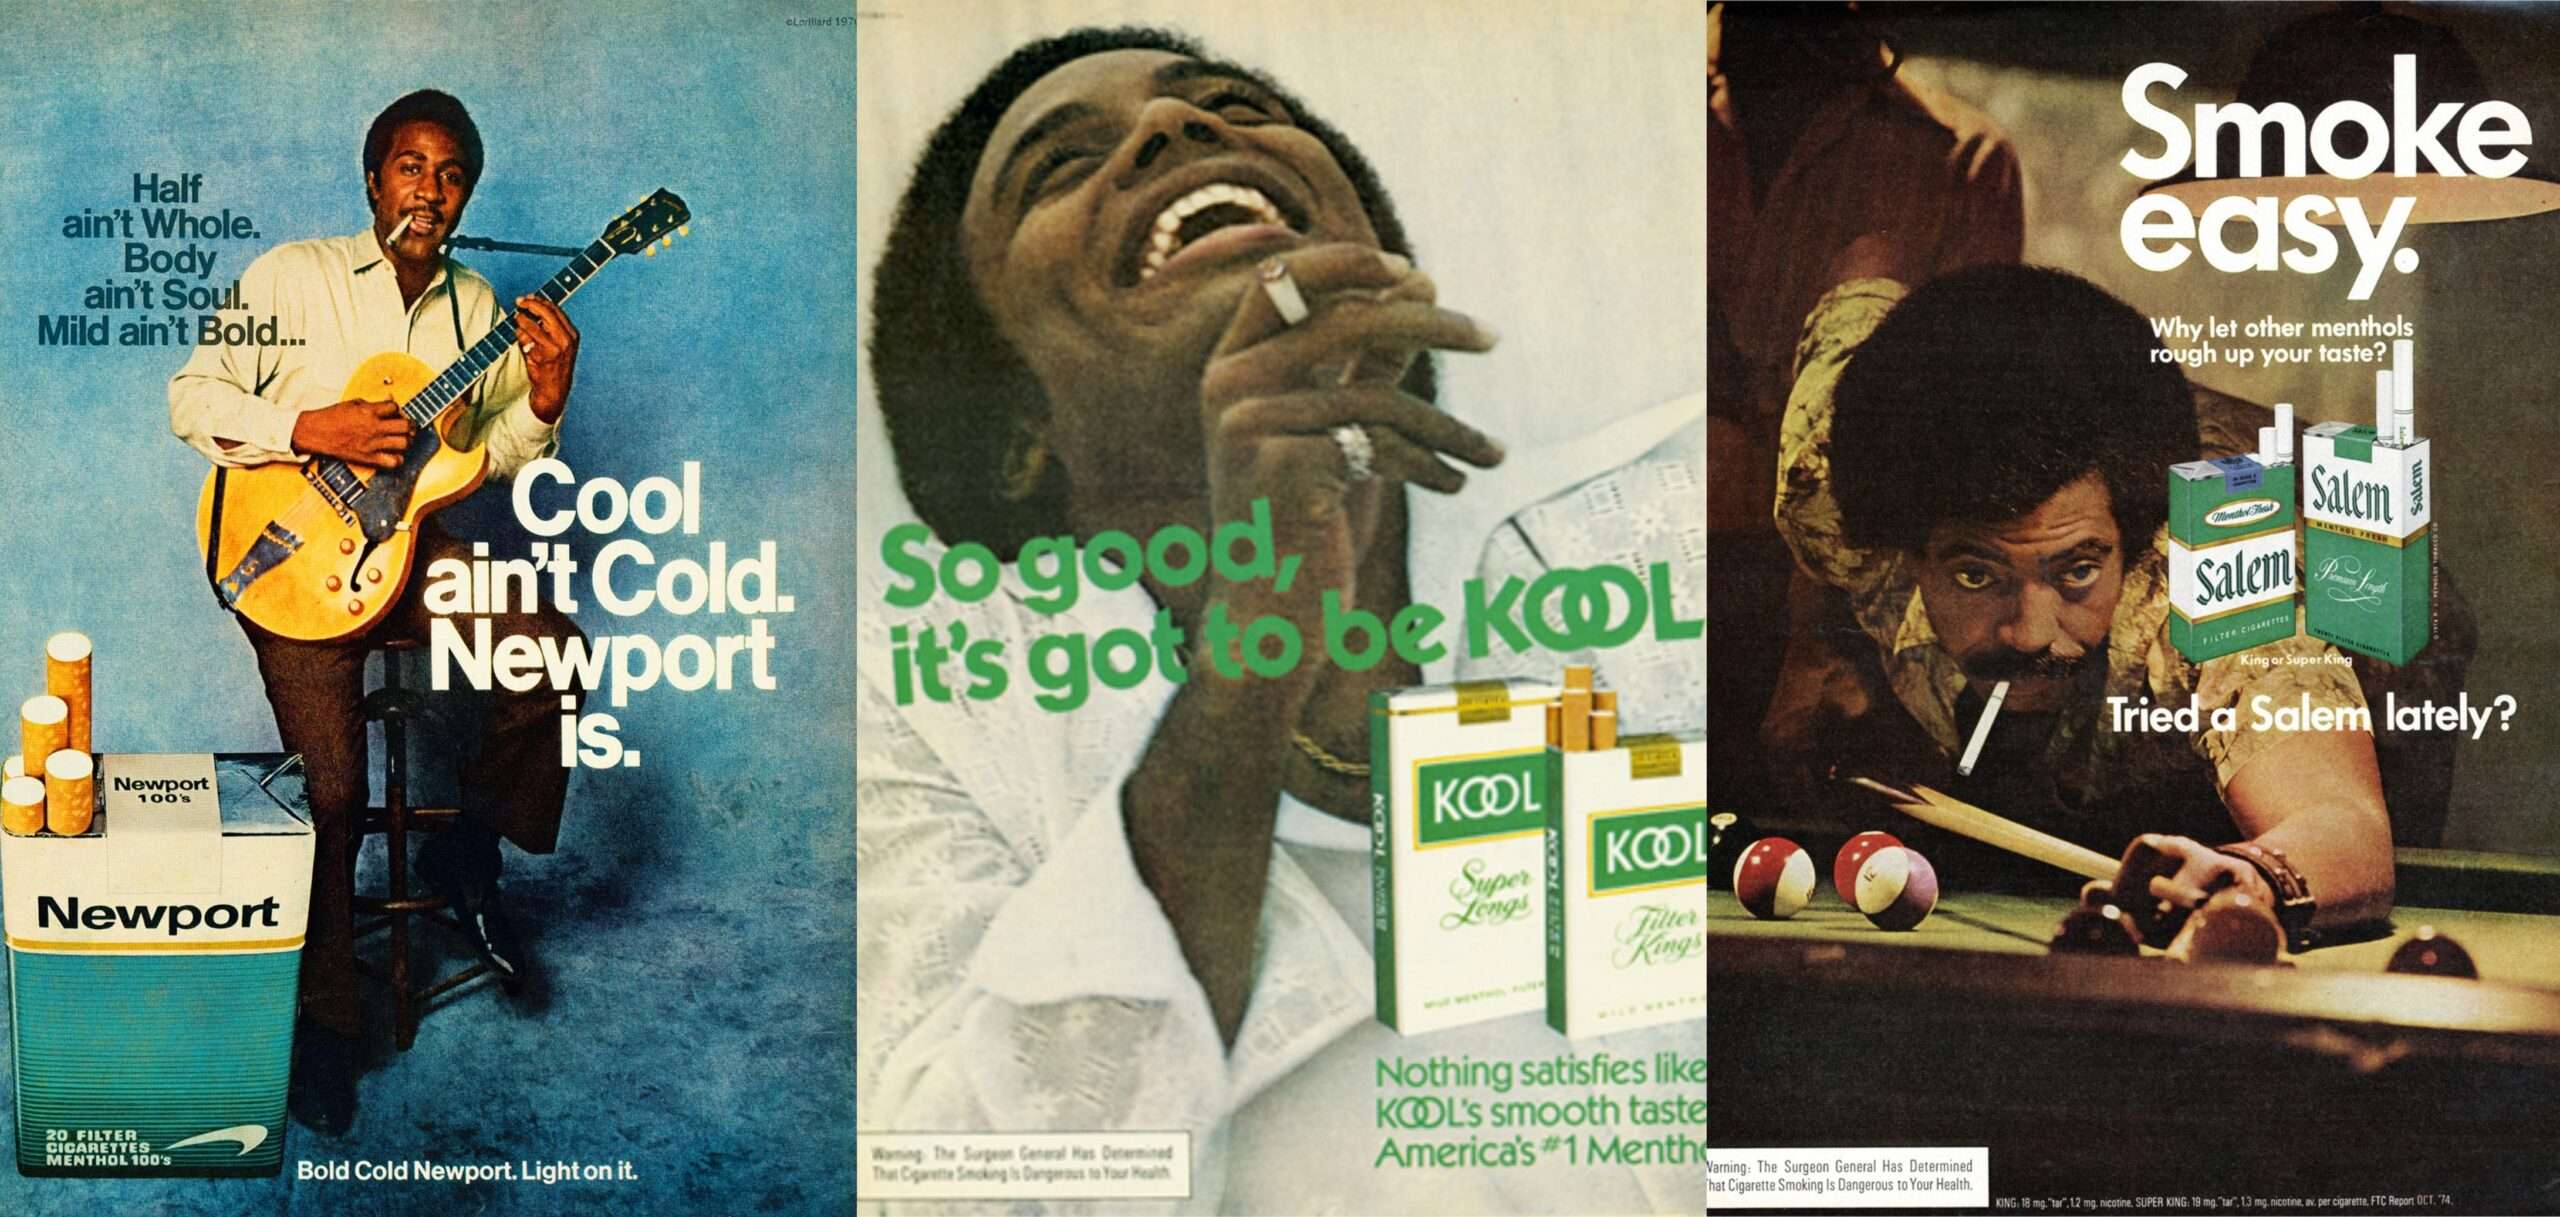 The FDA's Menthol Cigarette Ban Is a 'Racial Justice' Issue, but Not in